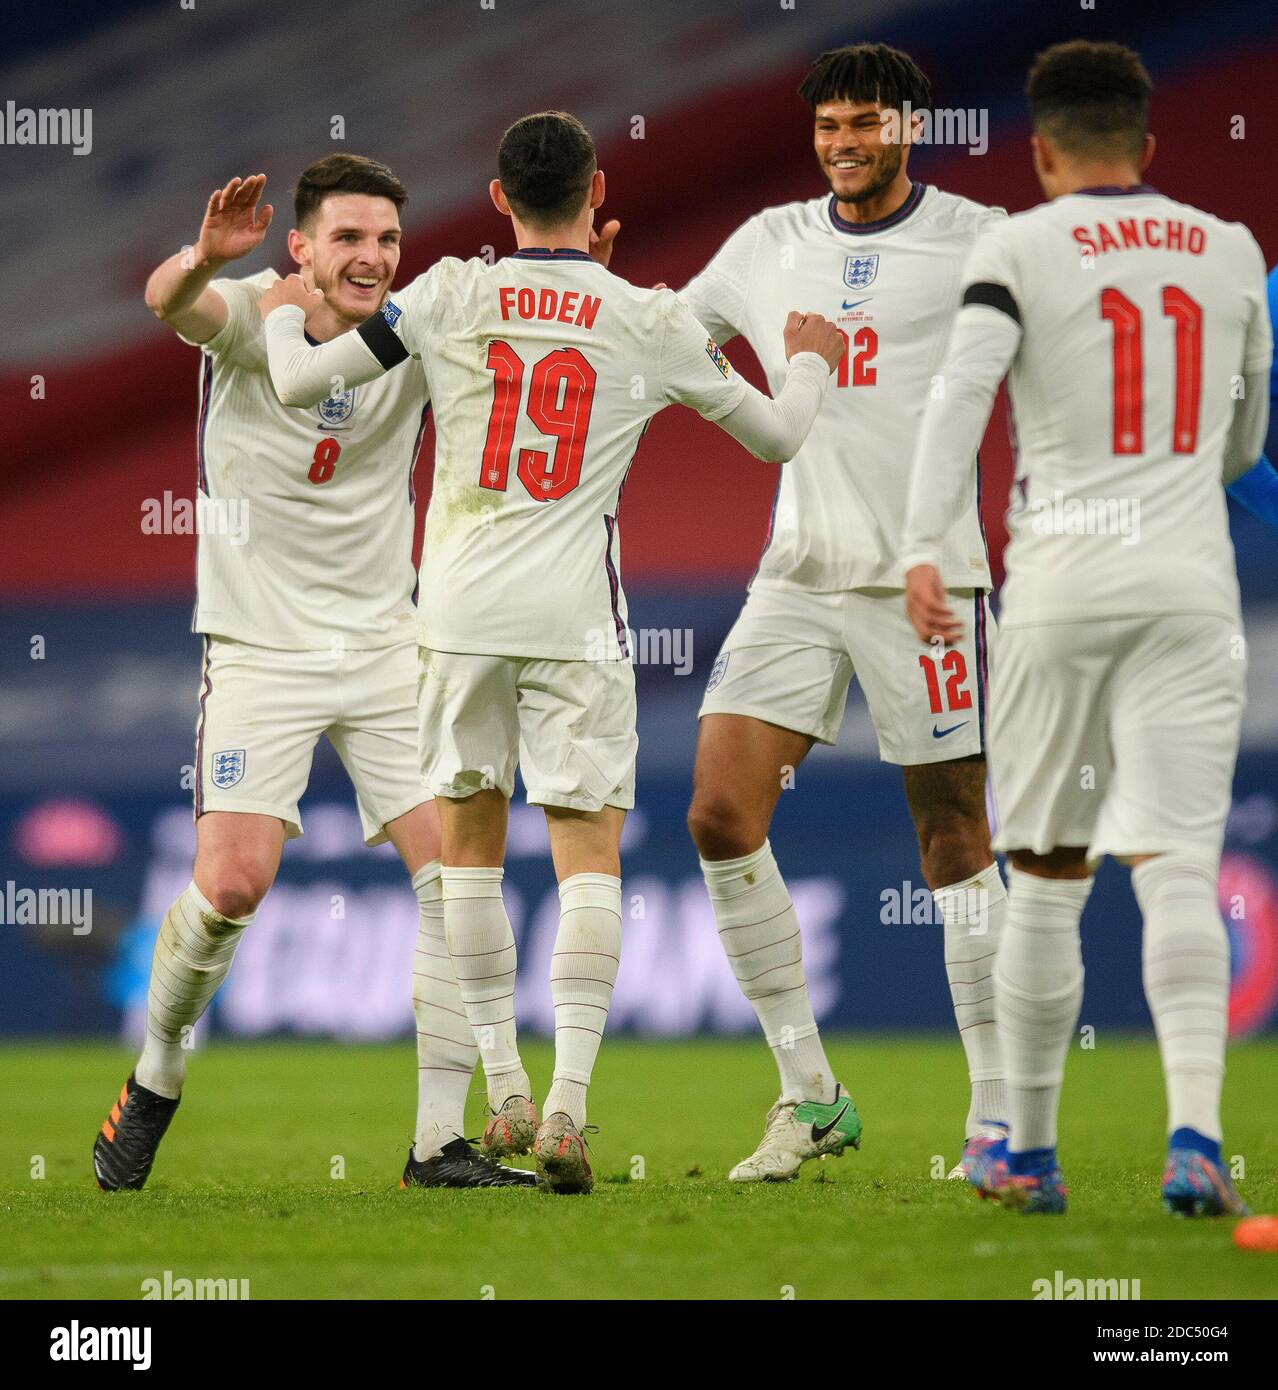 Wembley Stadium, London, 18th Nov 2020.   Engand’s Phil Foden celebrates his second goal  England v Iceland - UEFA Nations League - Group A2 - Wembley Picture Credit : © Mark Pain / Alamy Live News Stock Photo